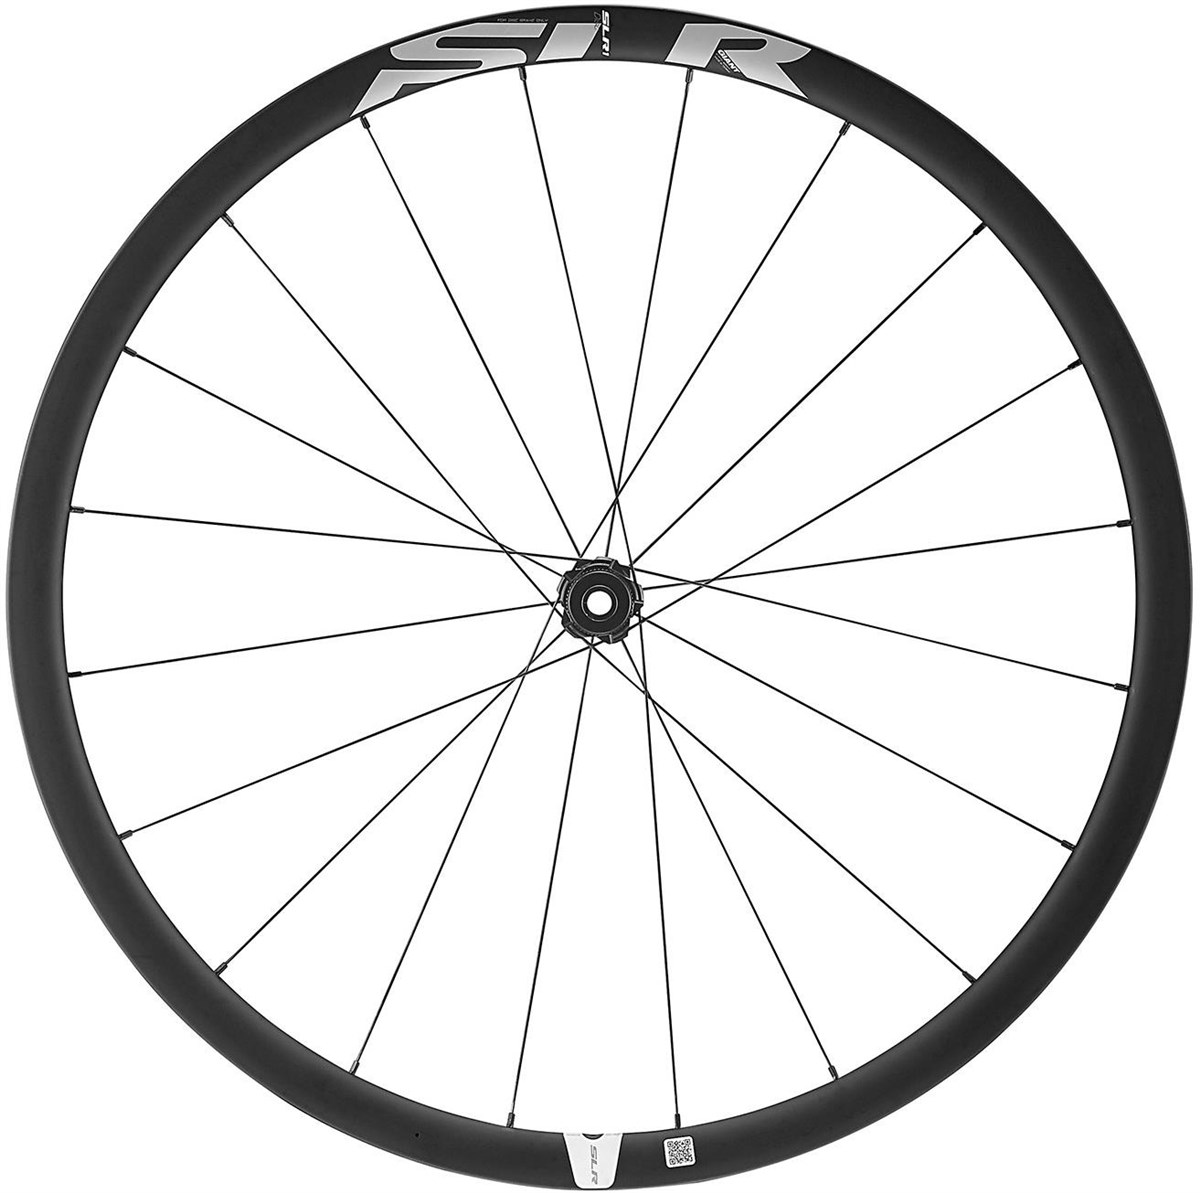 Giant SLR 1 Disc Centre-Lock Clincher 700c Road Wheels product image